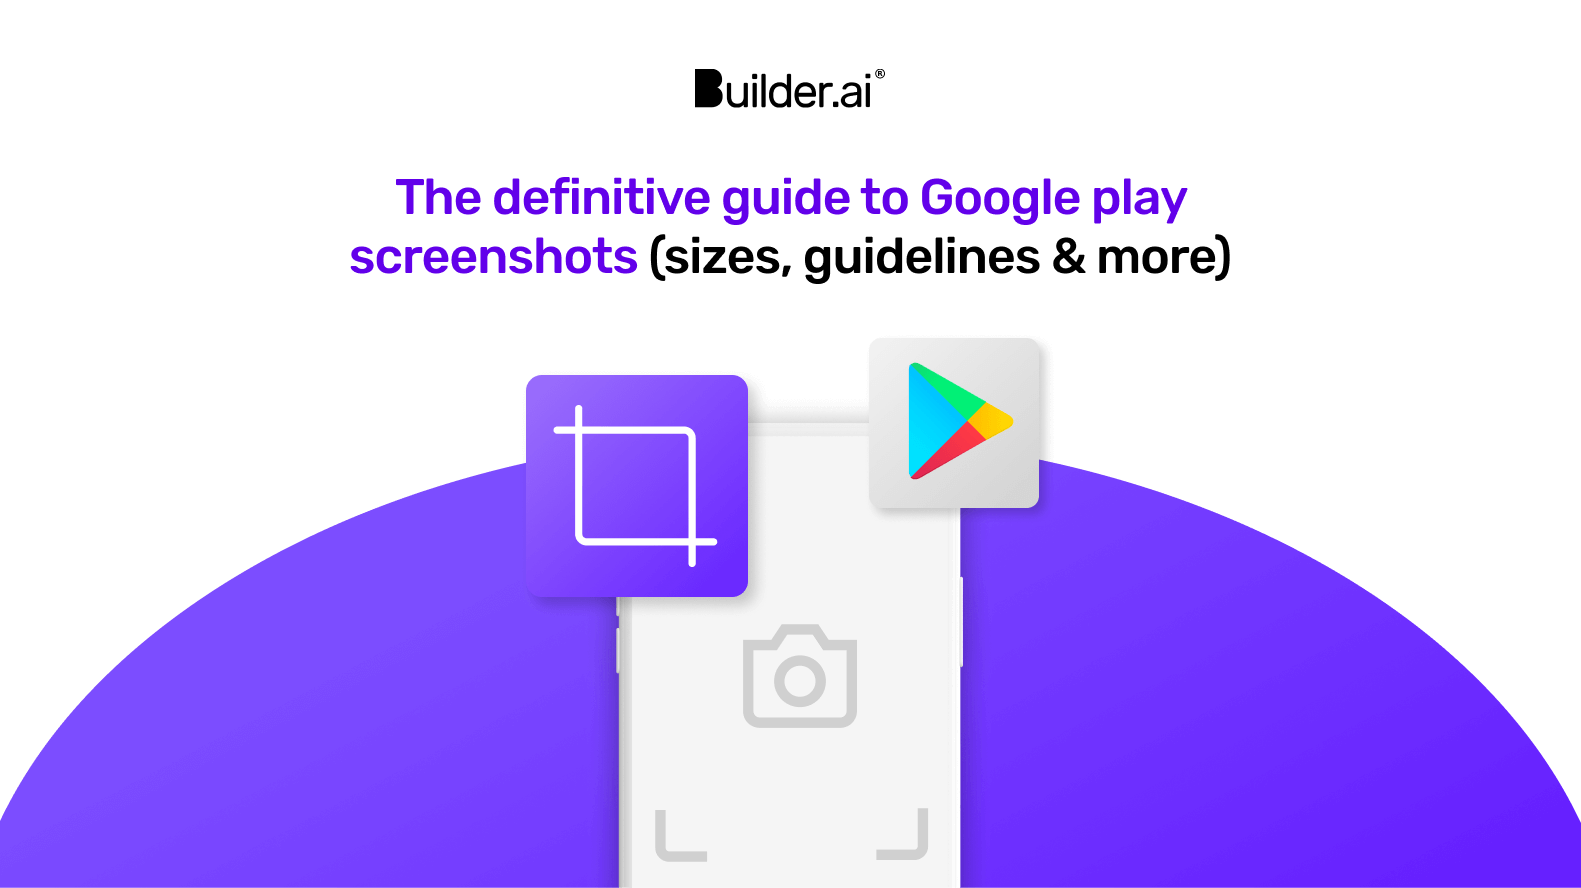 The definitive guide to Google Play screenshots (guidelines, sizes and more)